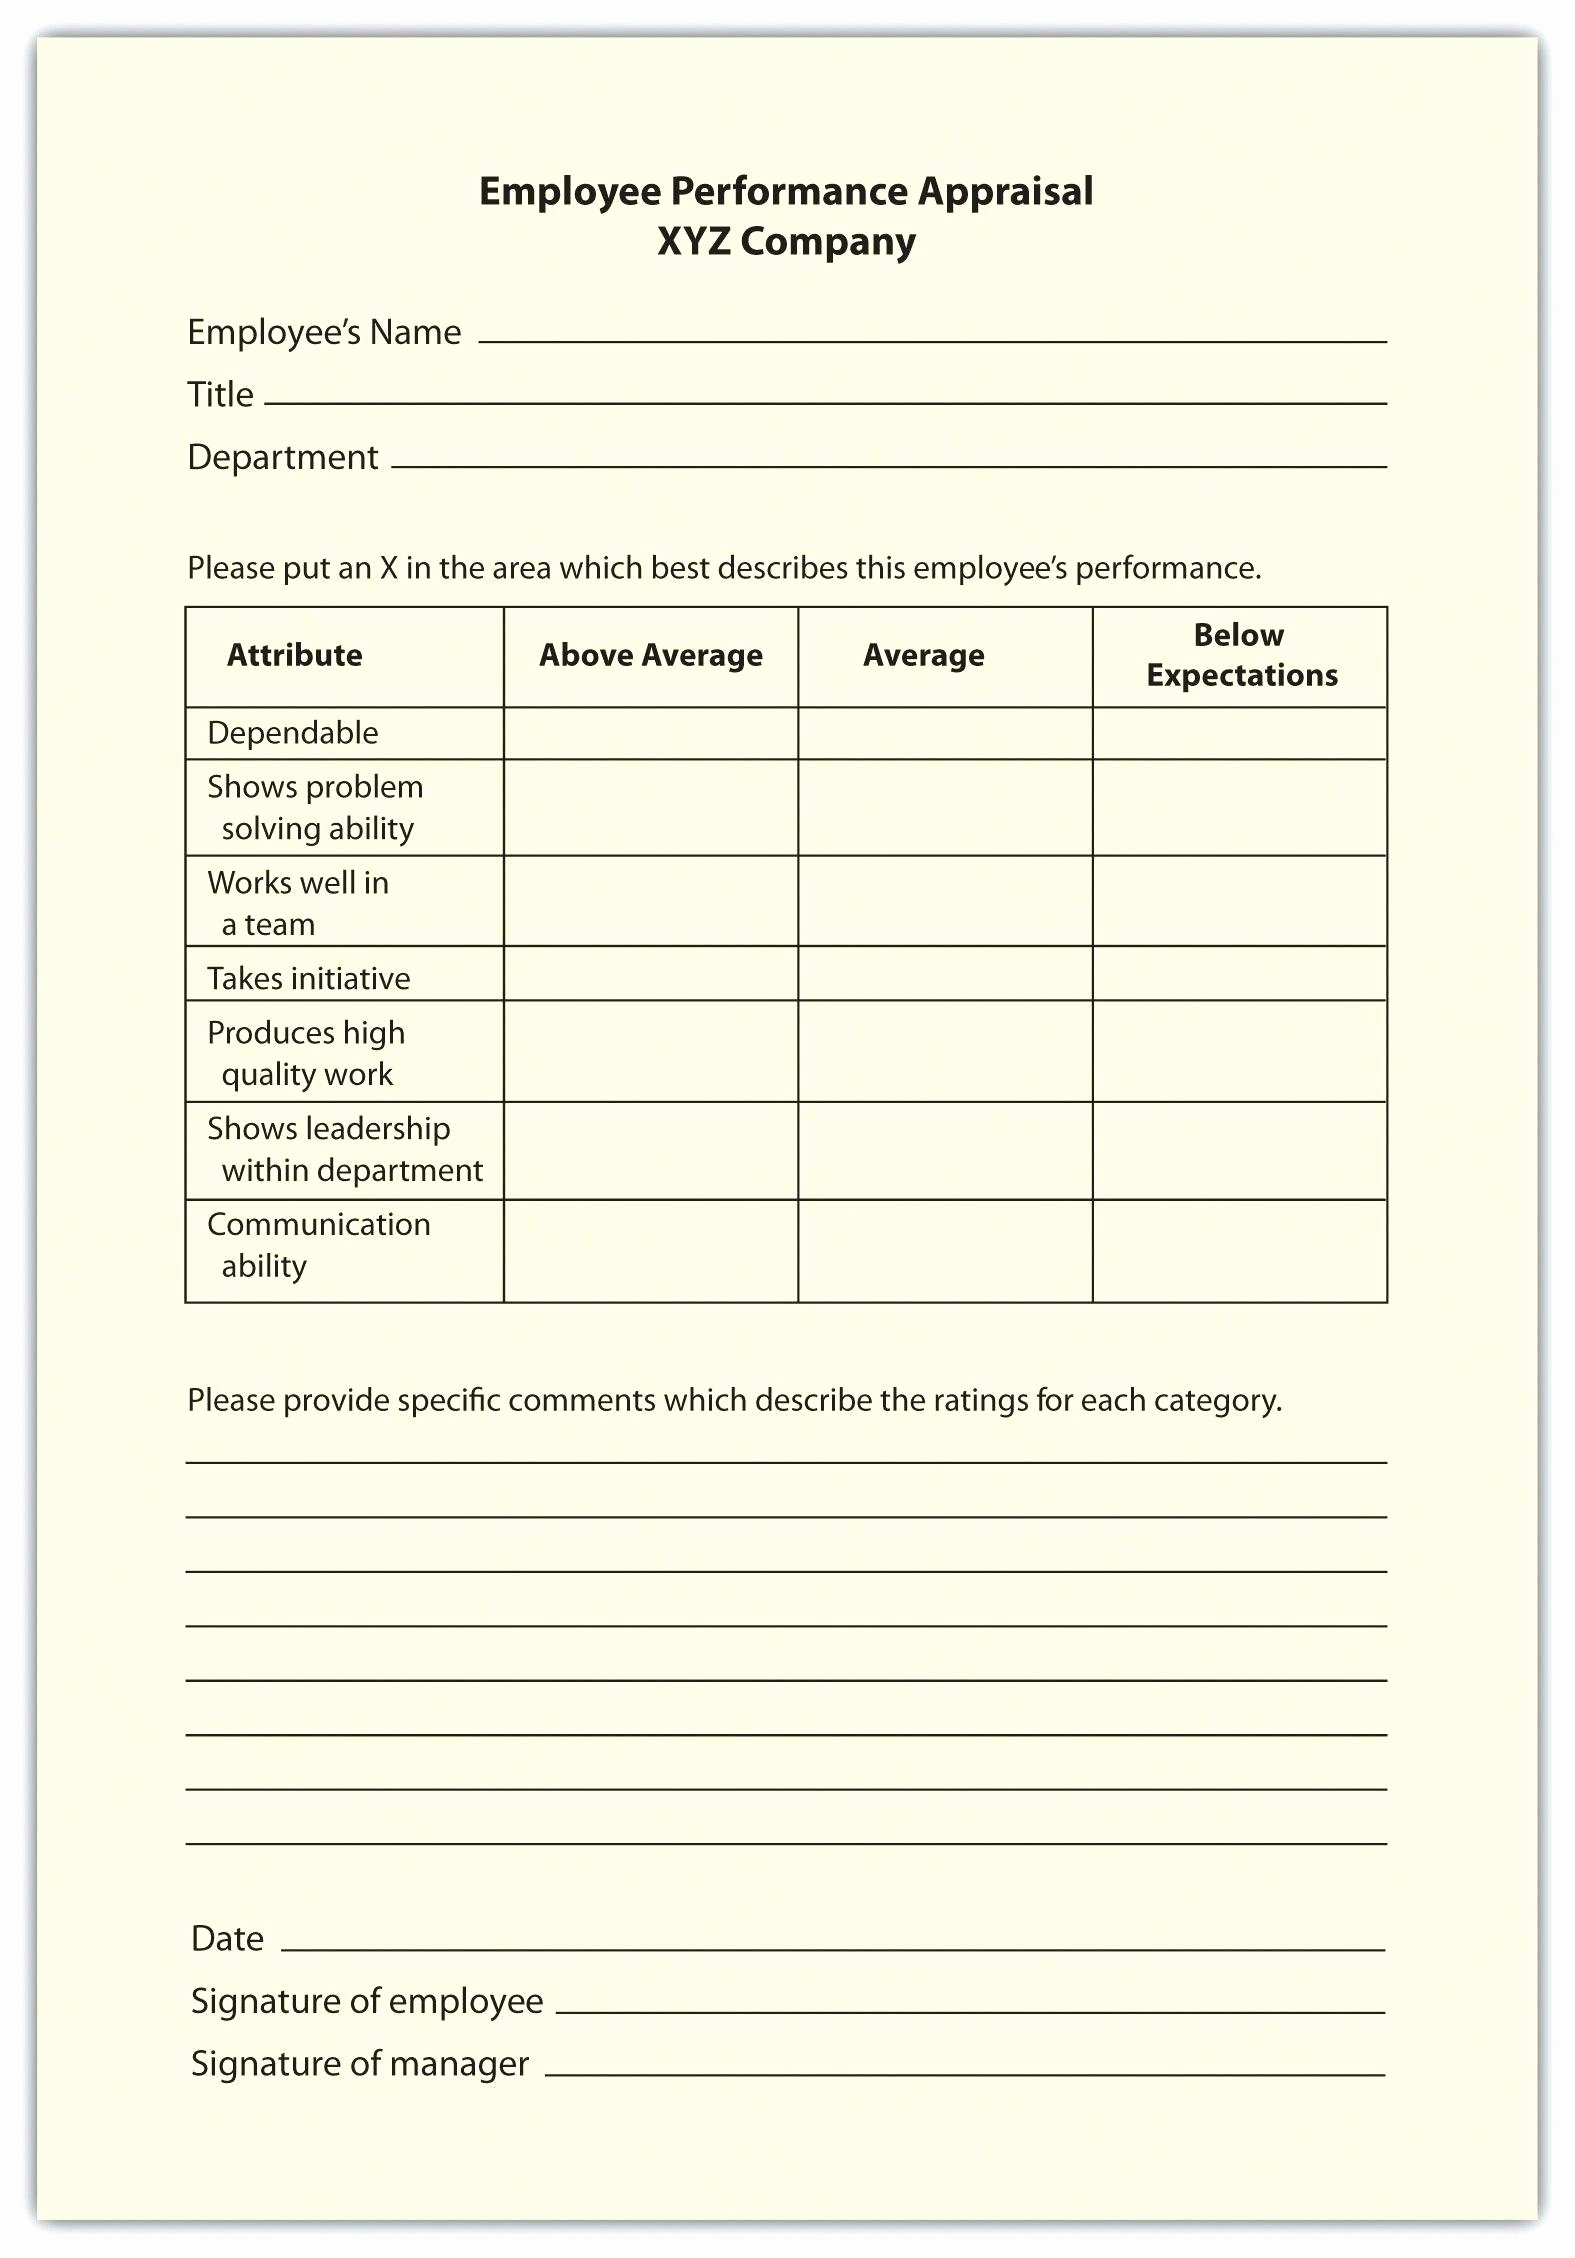 Customer Service Performance Review Template Luxury Performance Appraisal Template Word Appraisal Template